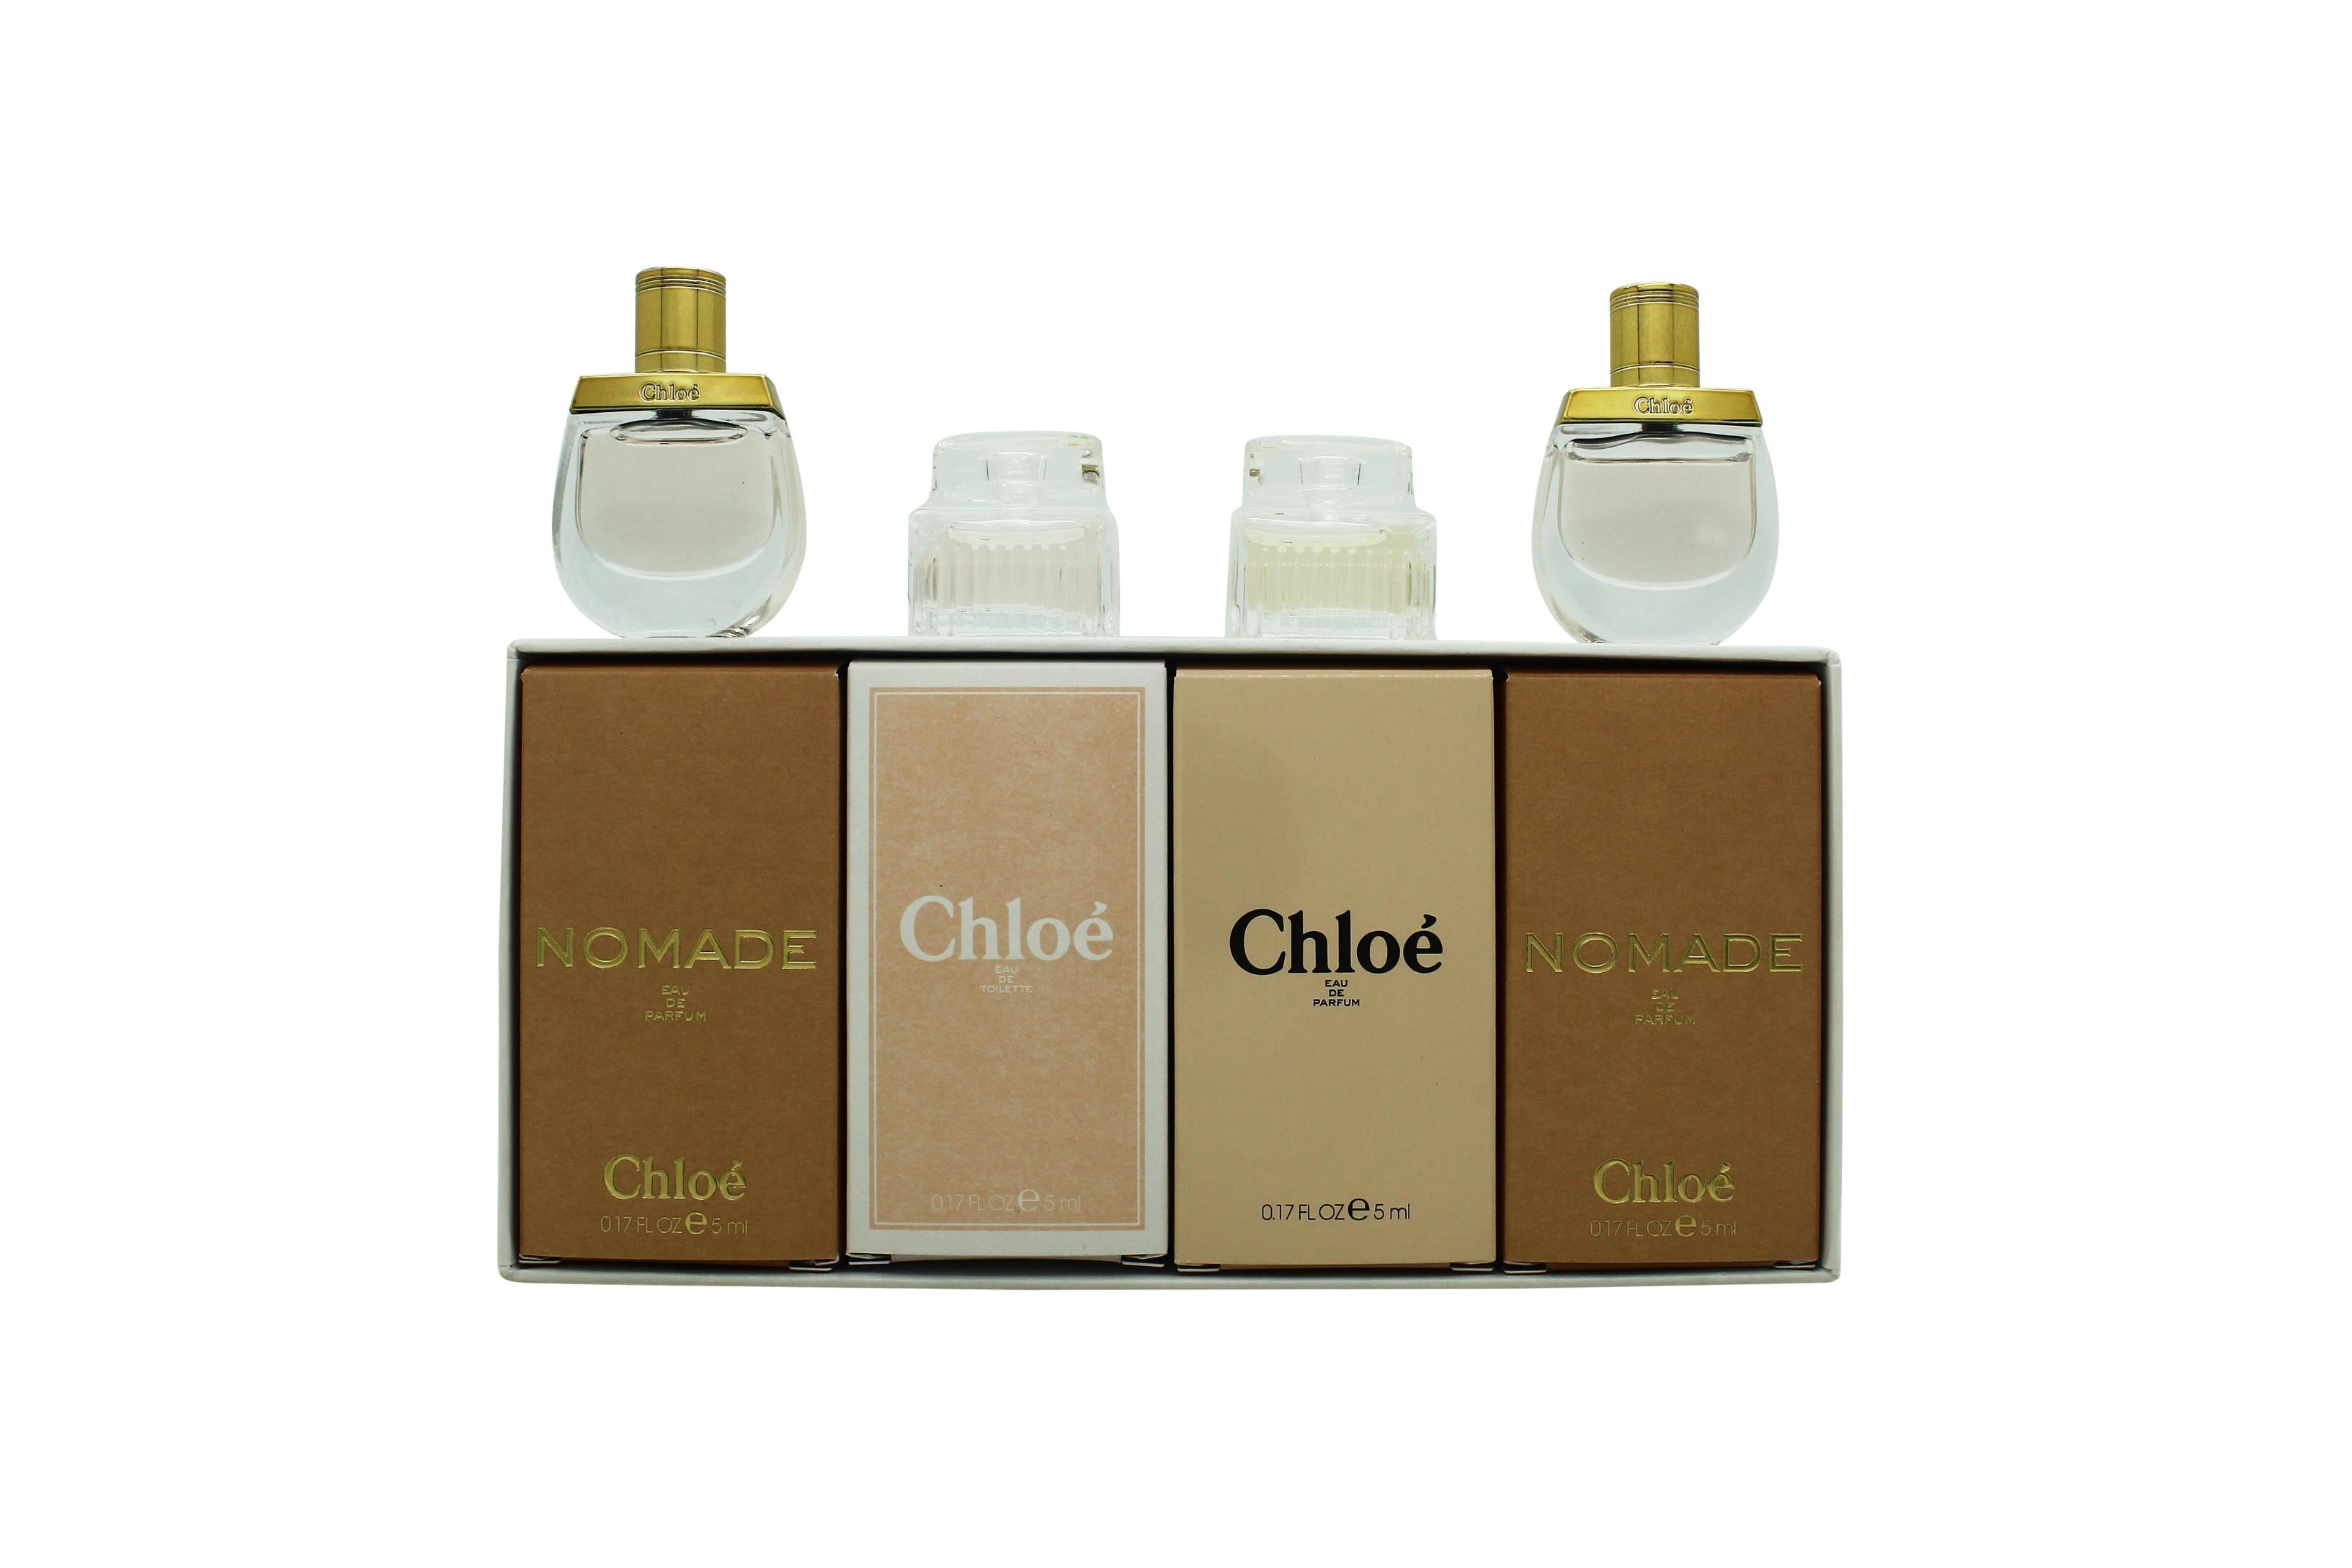 View Chloé Le Parfums Gift Set 4 Pieces This gift set contains 2 x 5ml Nomade EDP 1 x 5ml Chloe EDP 1 x 5ml Chloe EDT information